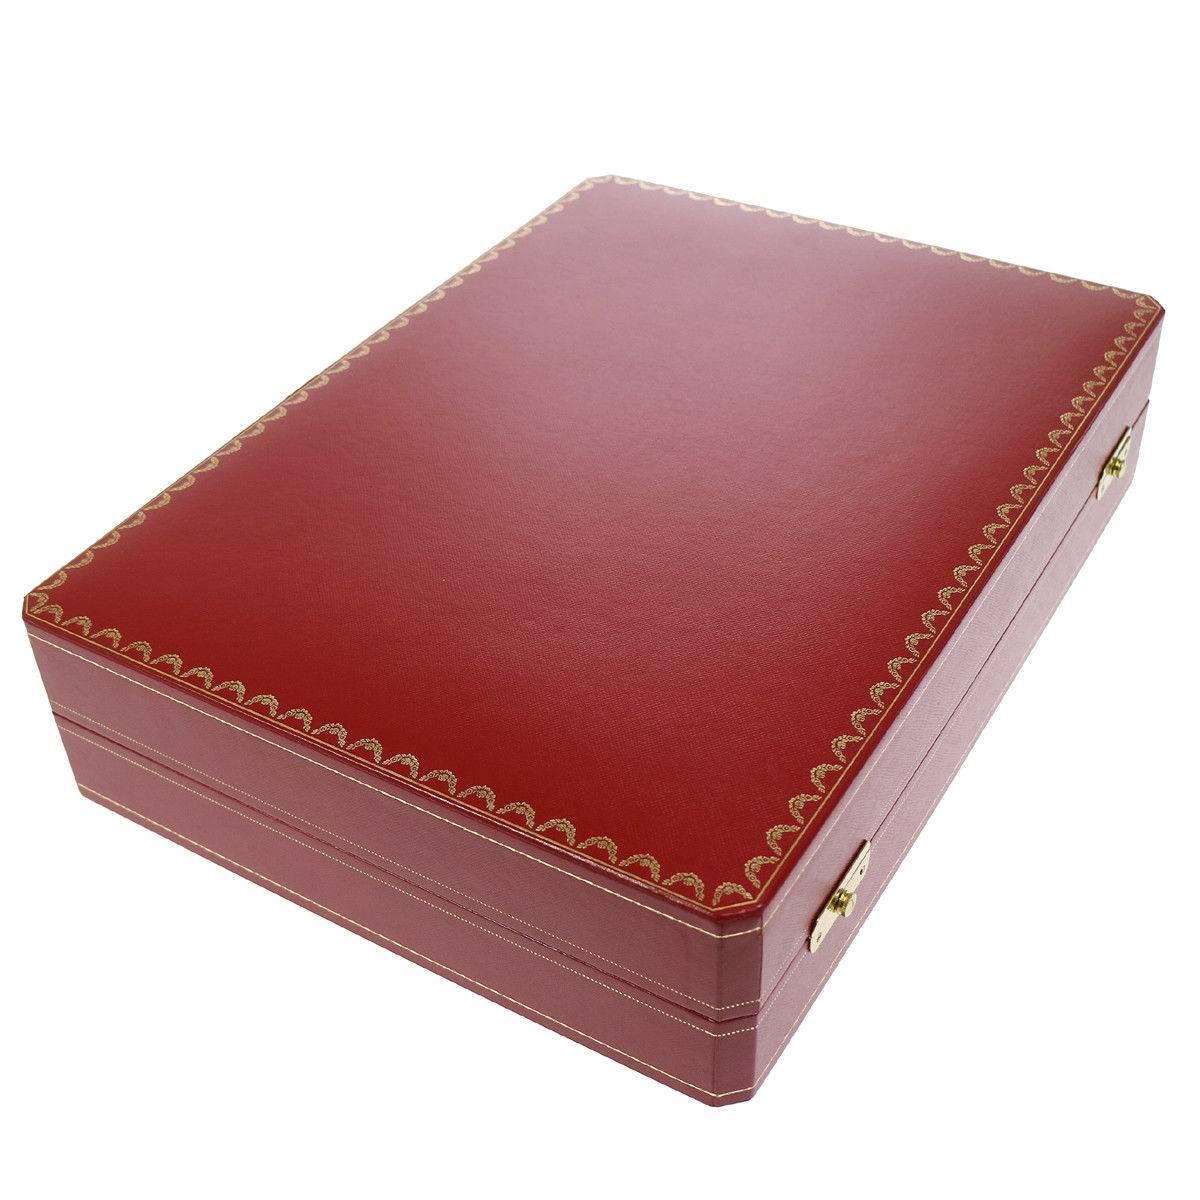 A wonderful gift idea! Cartier Red Leather Men's Women's Travel Storage Vanity Watch Case Trunk in Box

Leather
Gold tone hardware
Push lock closures
Woven lining
Measures 15.75